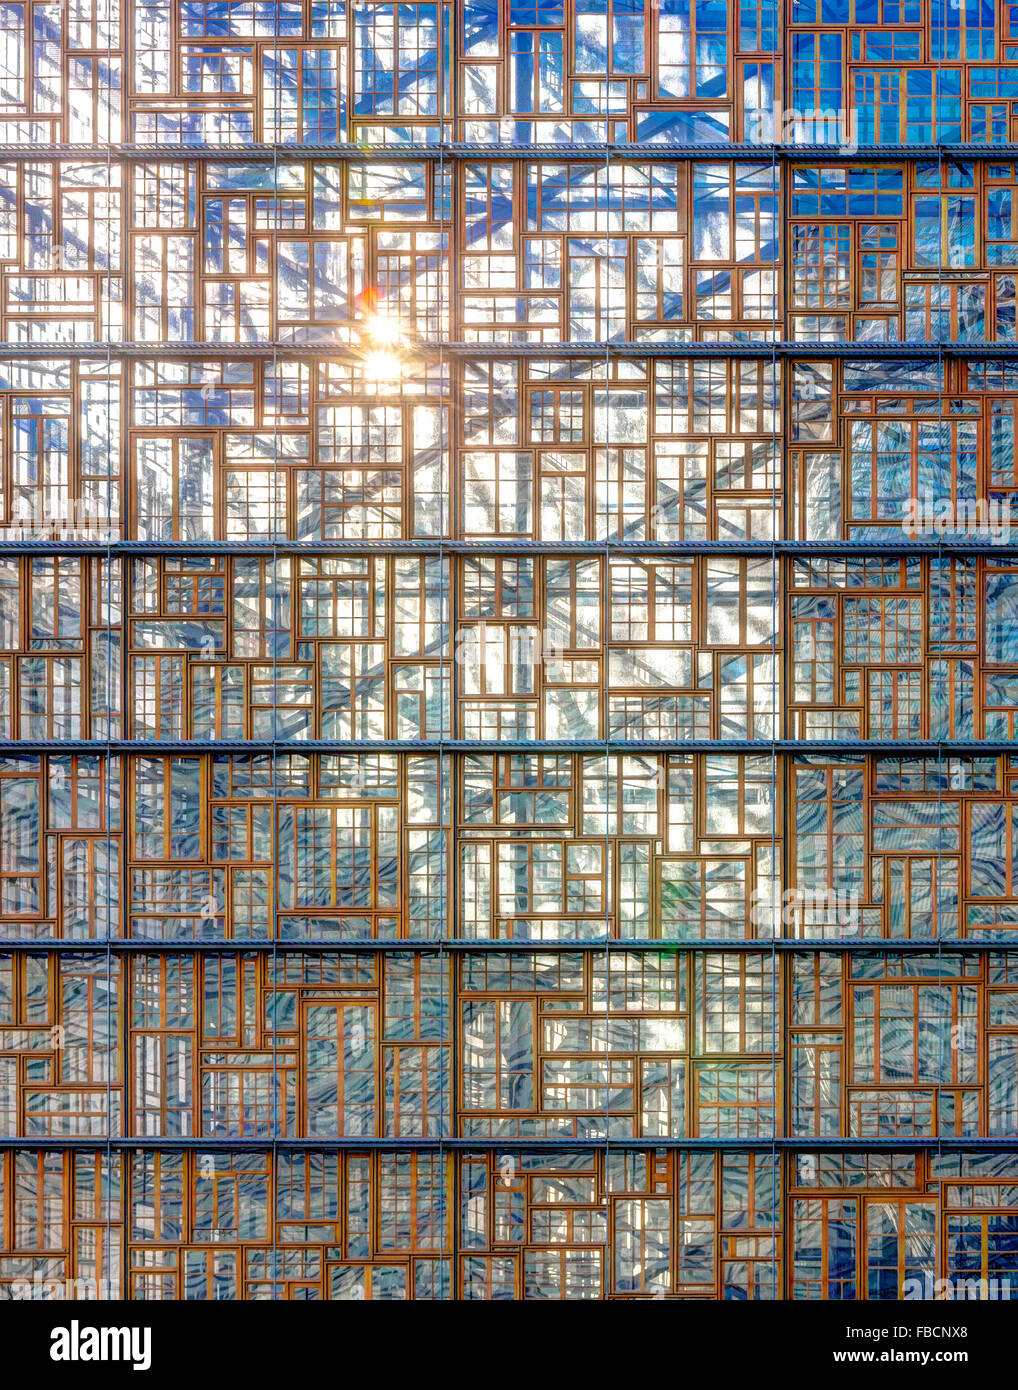 Brussels, New Europa Building, designed by Philippe Samyn & Partners, is the new Headquarters of the European Council. Aka the Egg Building. Facade of recycled windows. Stock Photo